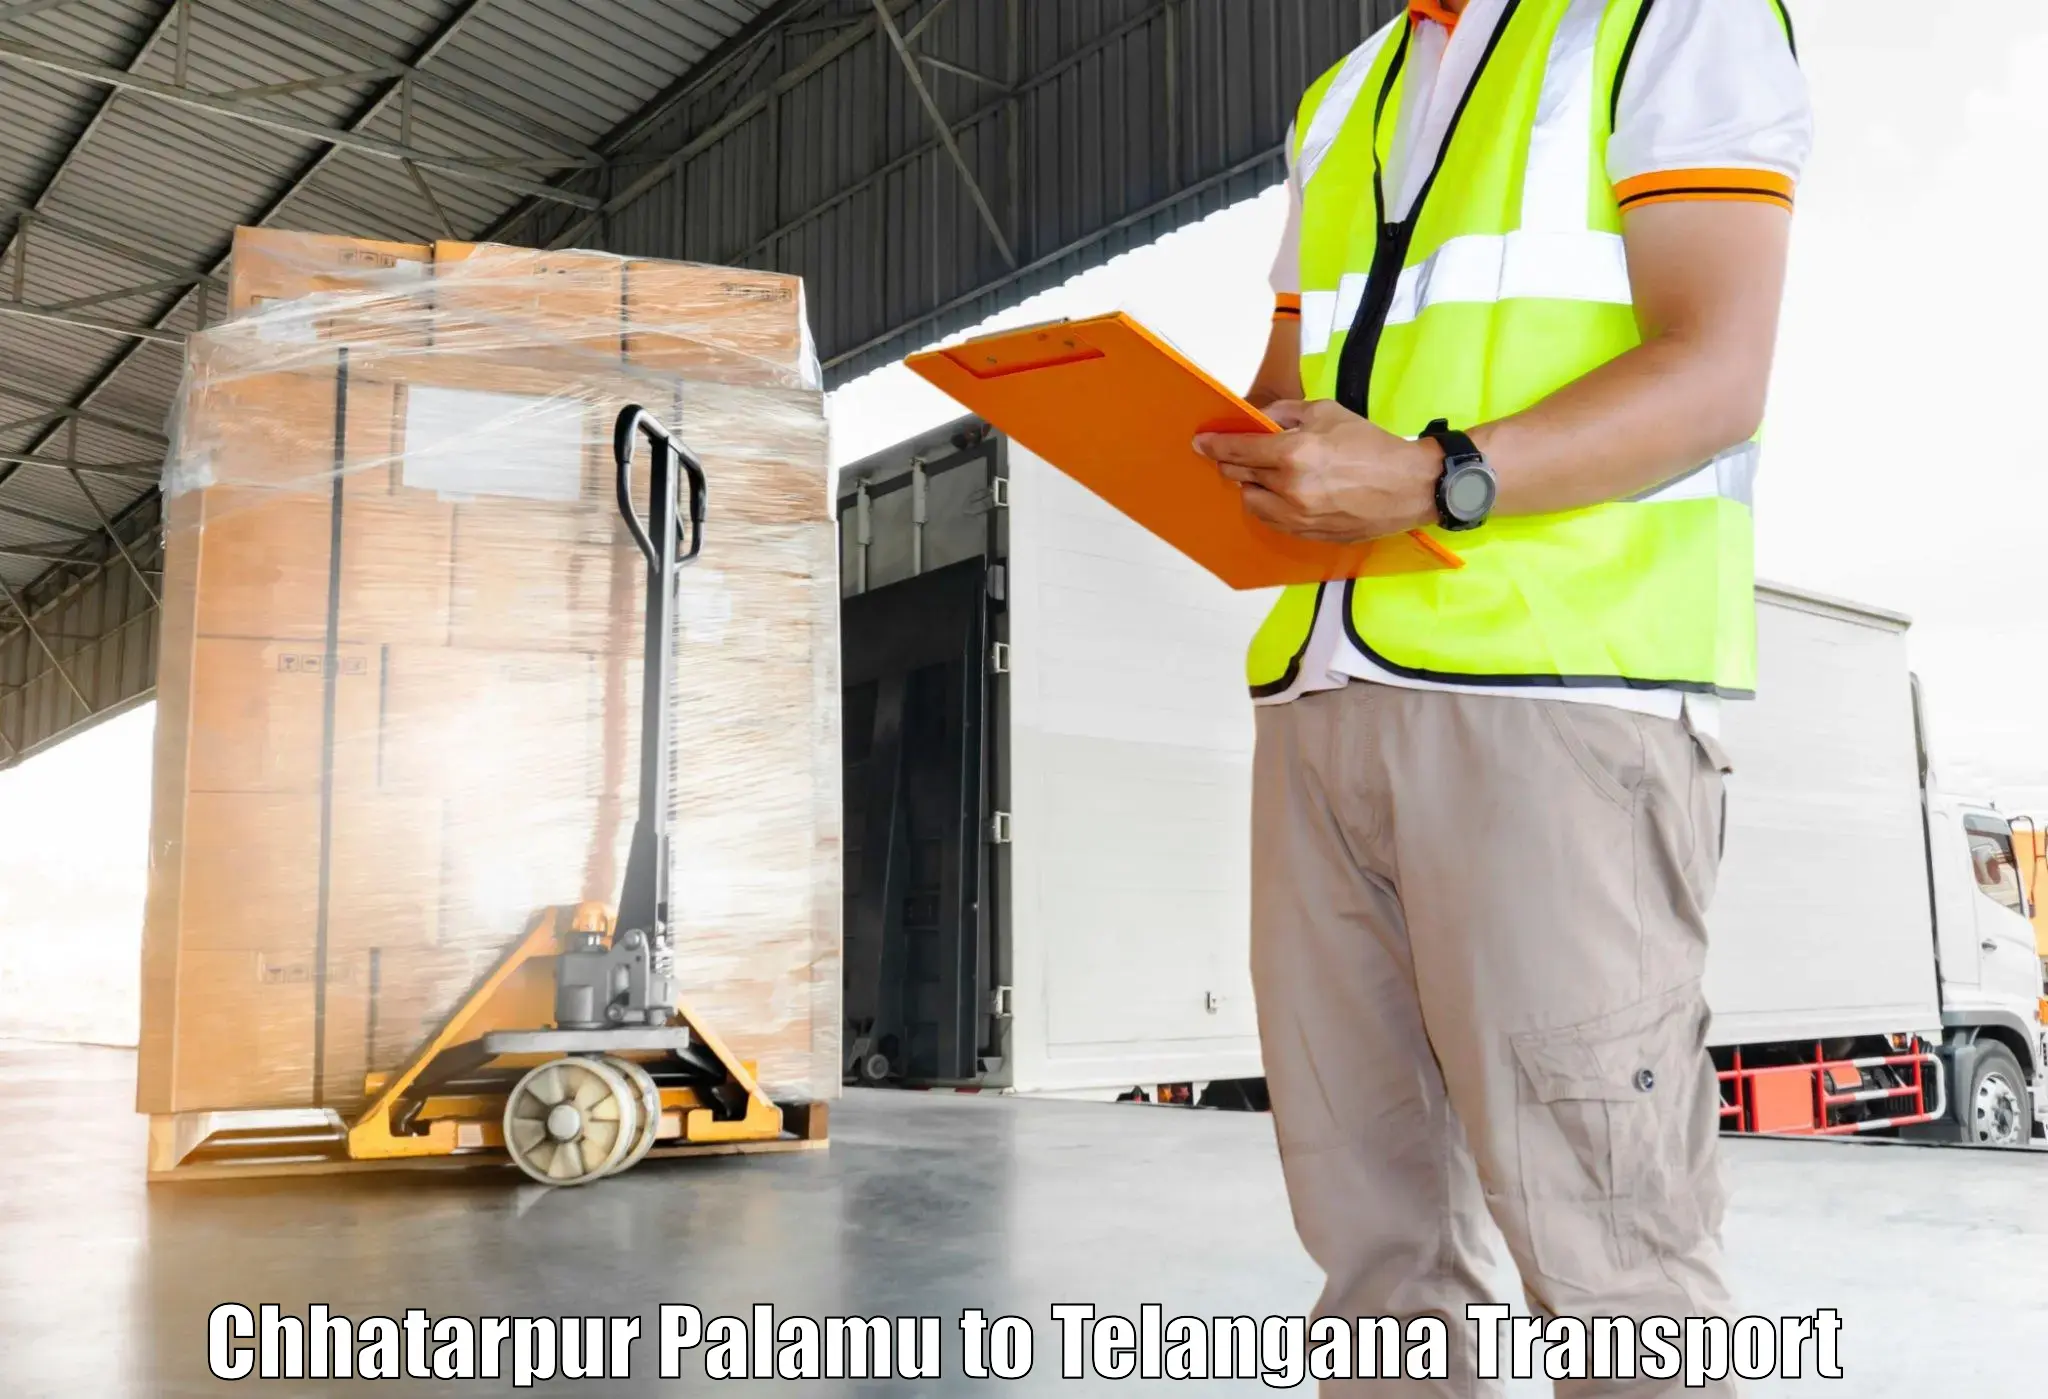 Container transport service Chhatarpur Palamu to International Institute of Information Technology Hyderabad